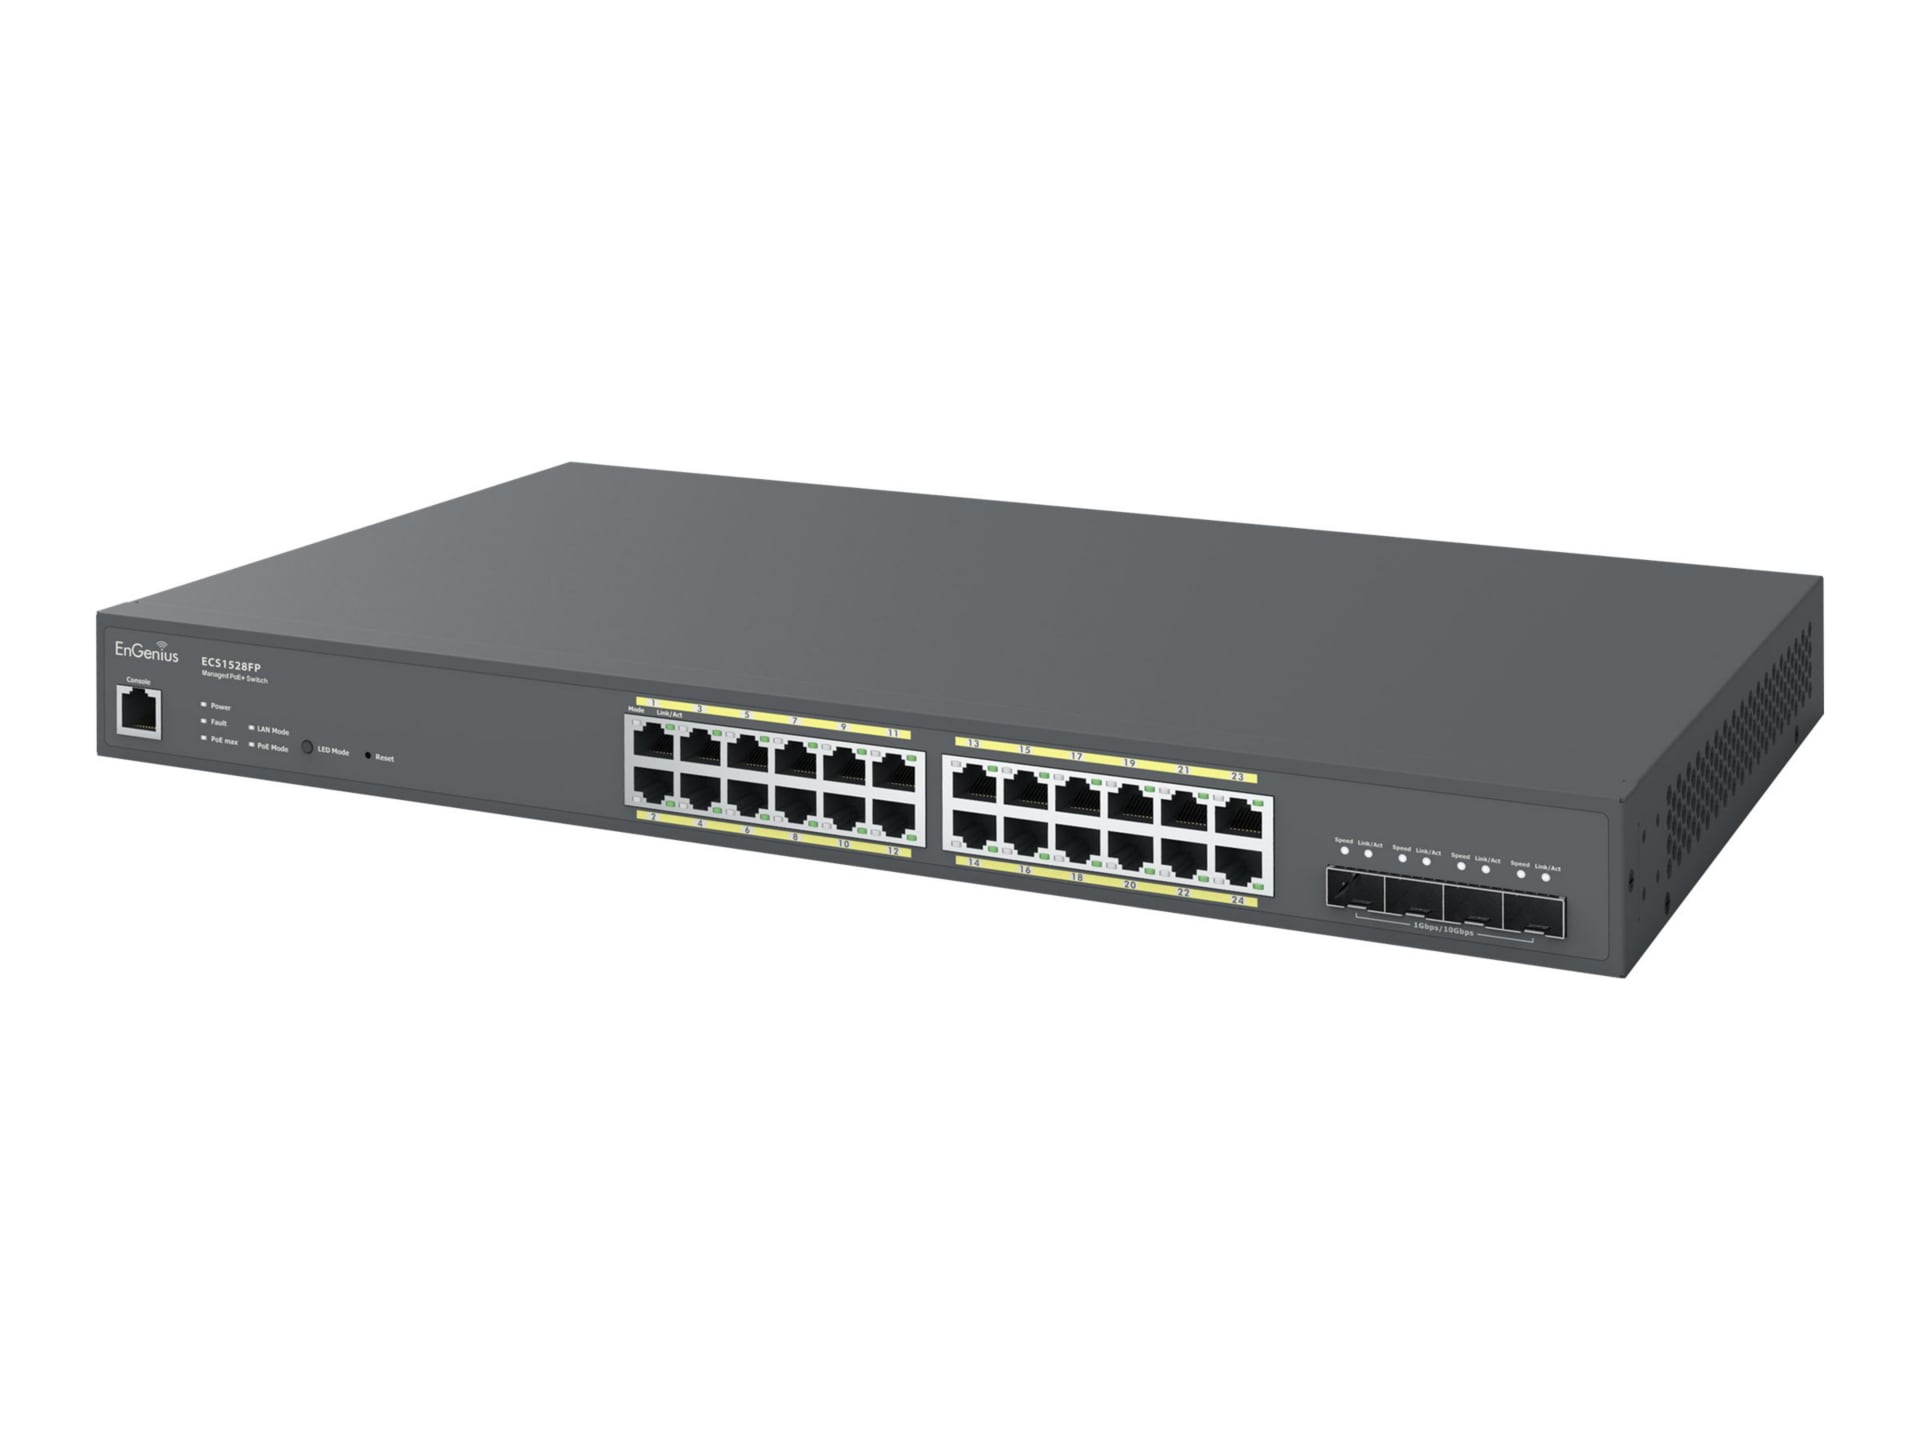 EnGenius Cloud Switch Series ECS1528FP - switch - 24 ports - managed - rack-mountable